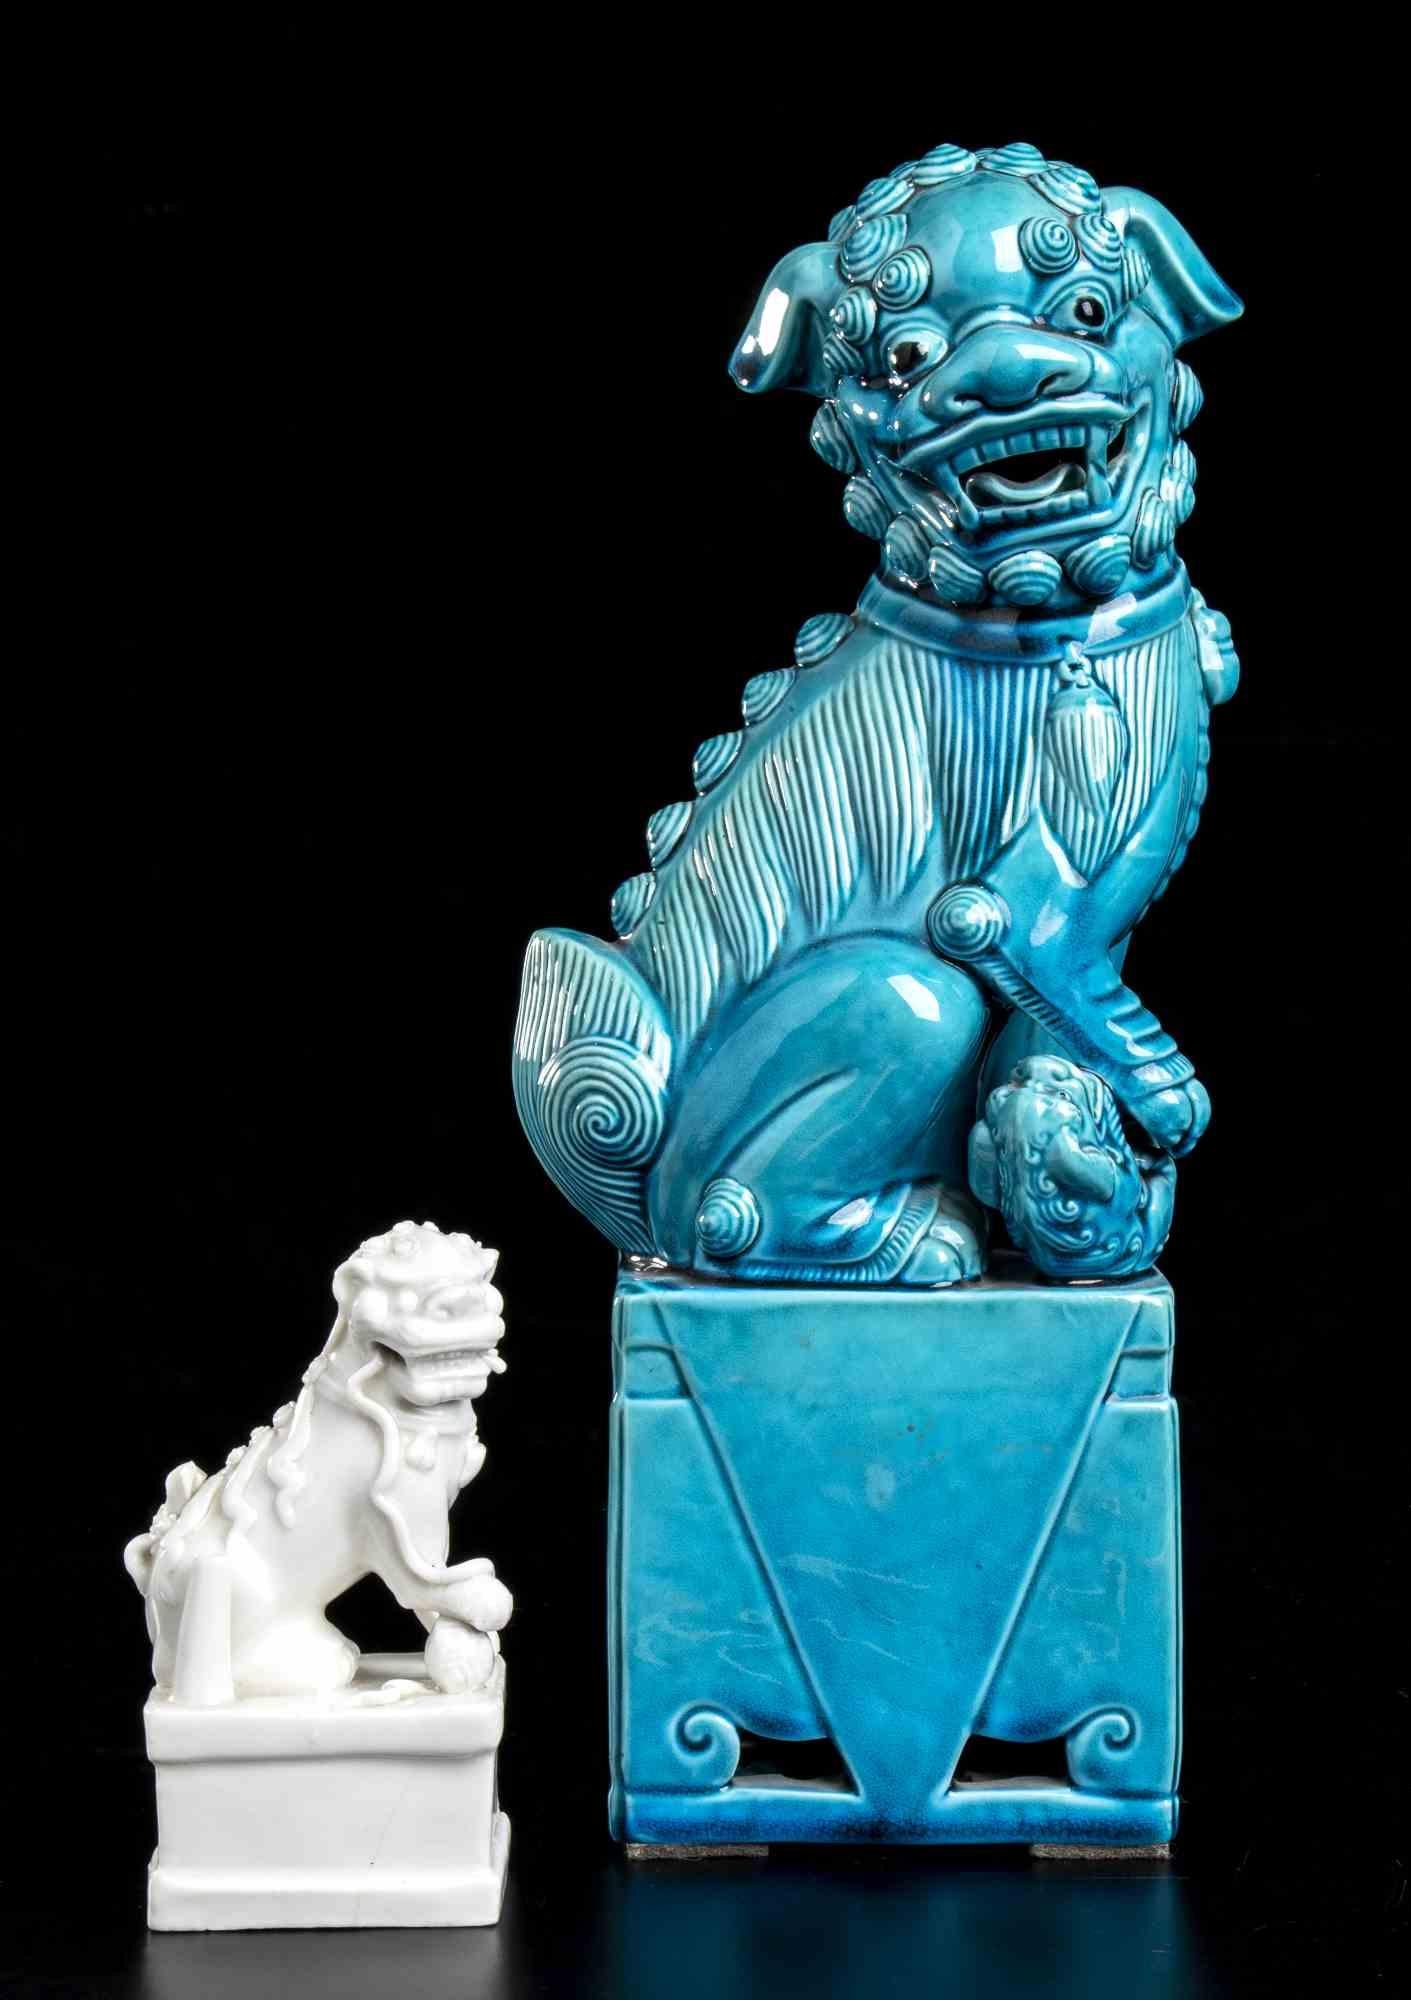 China, mid-20th century

Both seated on the hind legs on a rectangular section plinth, the right front paw resting on the ball symbol of the Void and the head turned to the right, the larger covered on the outside with a turquoise glaze, the